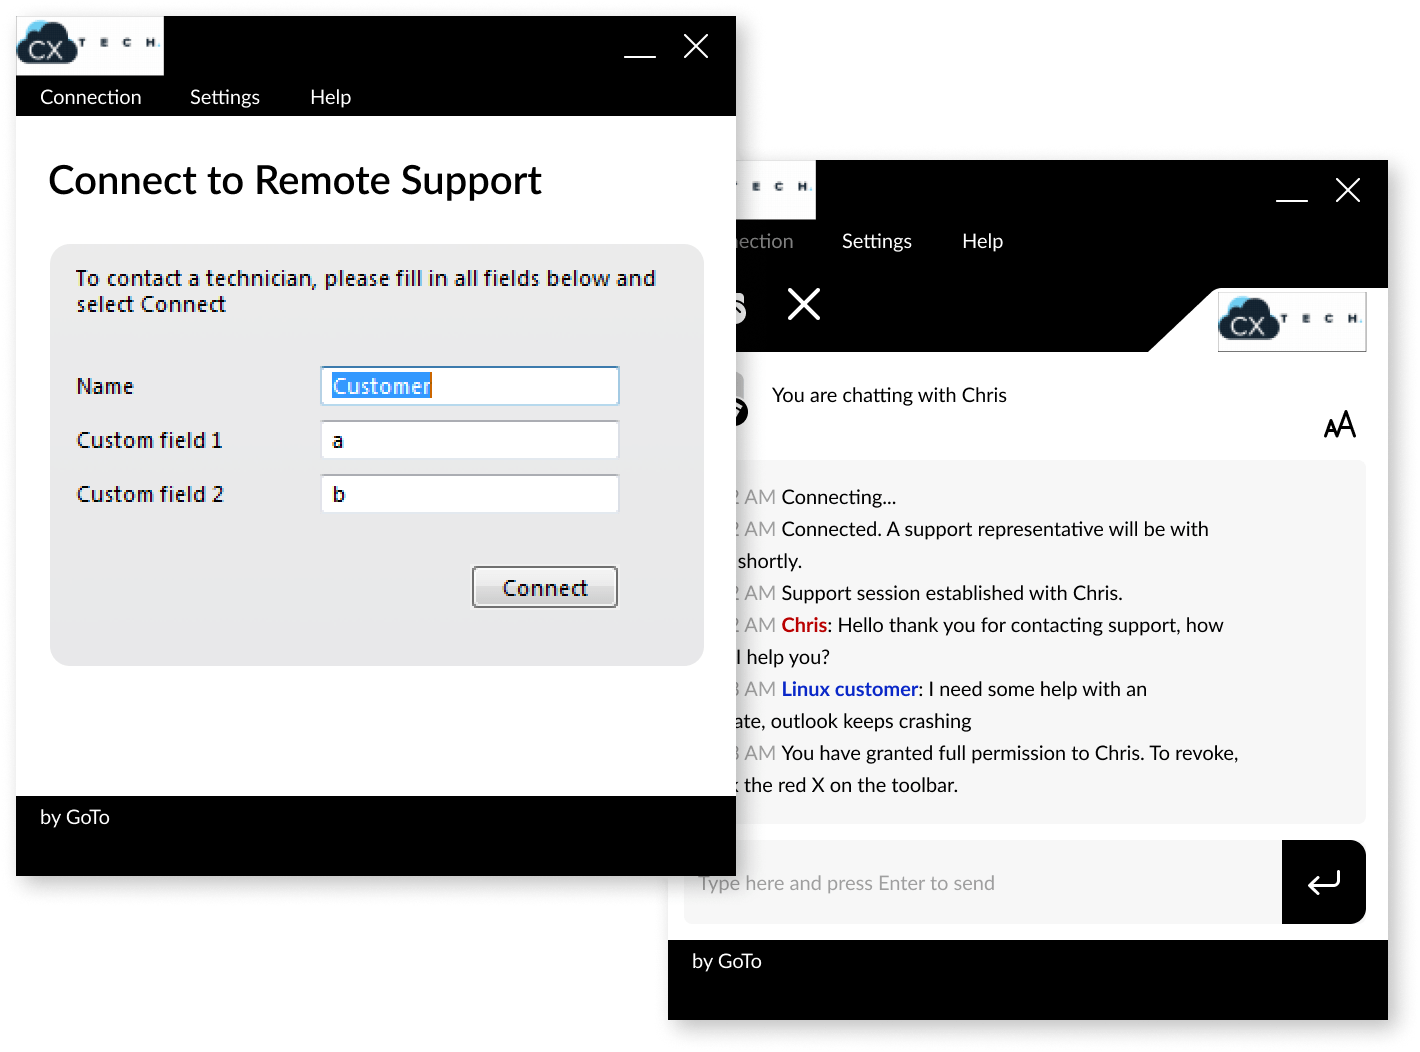 UI showing chat window and connecting to remote support